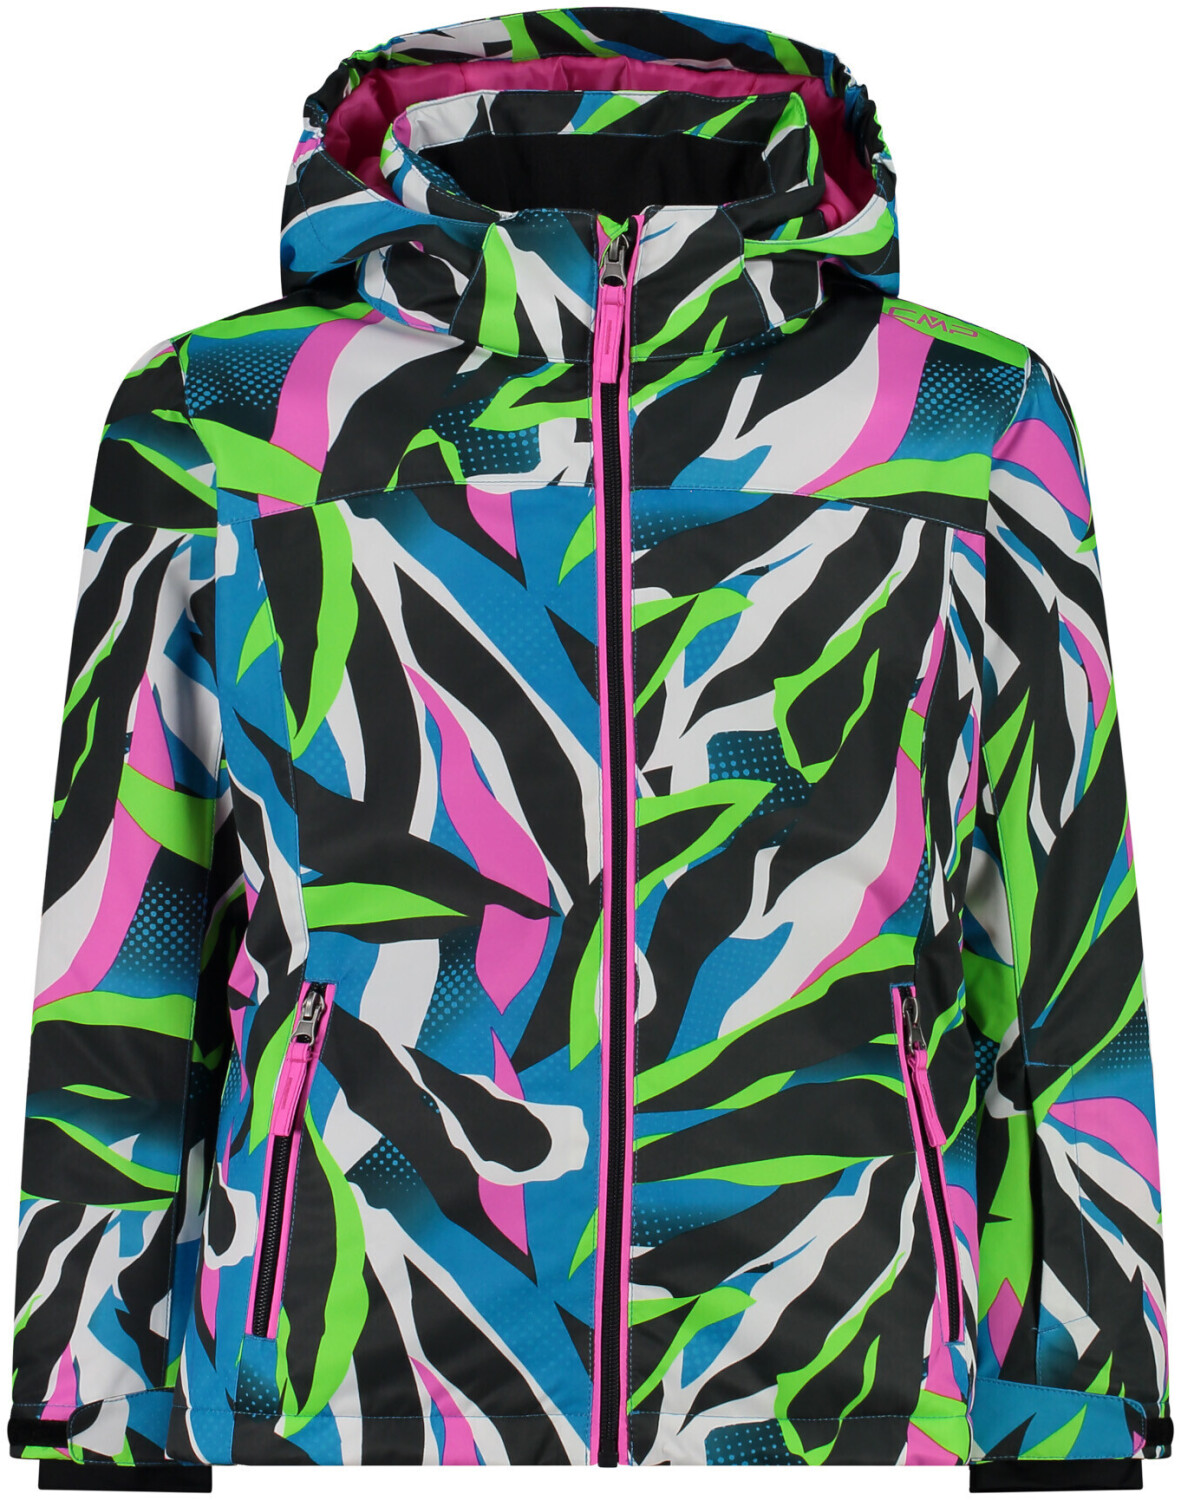 Buy CMP Girl Snaps Jacket (39W2085) purple fluo/turchese from £30.99  (Today) – Best Deals on